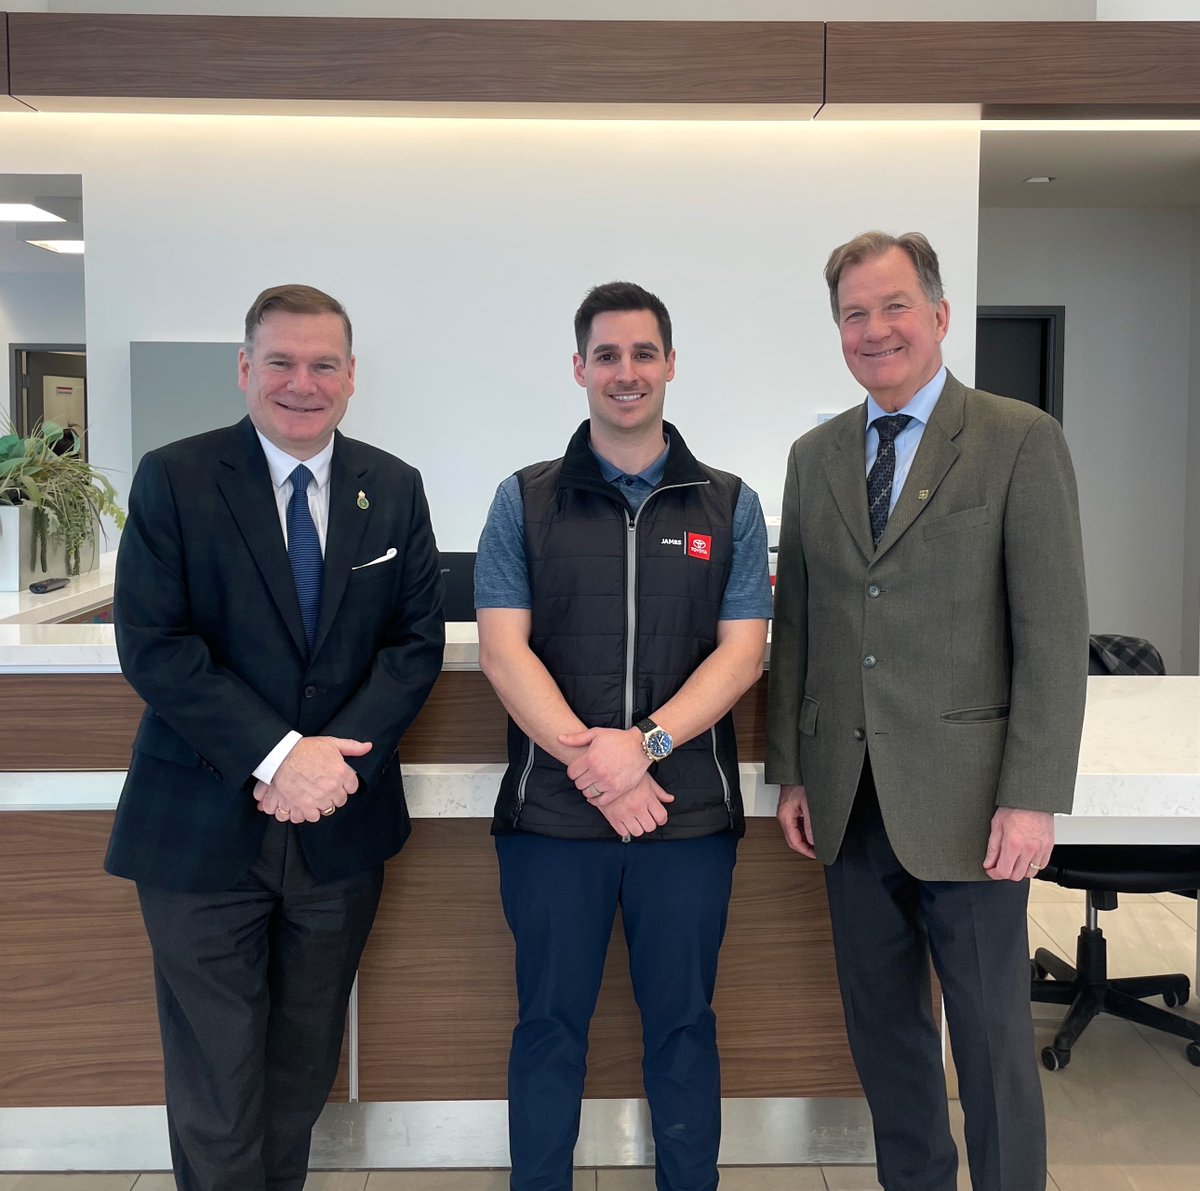 I had an amazing trip to Timmins this week. Thank you @GeorgePirieMPP for your hospitality & showing me around! It was a pleasure to meet with the teams at @TgiNewsCrew & James Toyota to discuss my ministry’s DDR program & thank you to the Timmins @ServiceOntario for the tour.